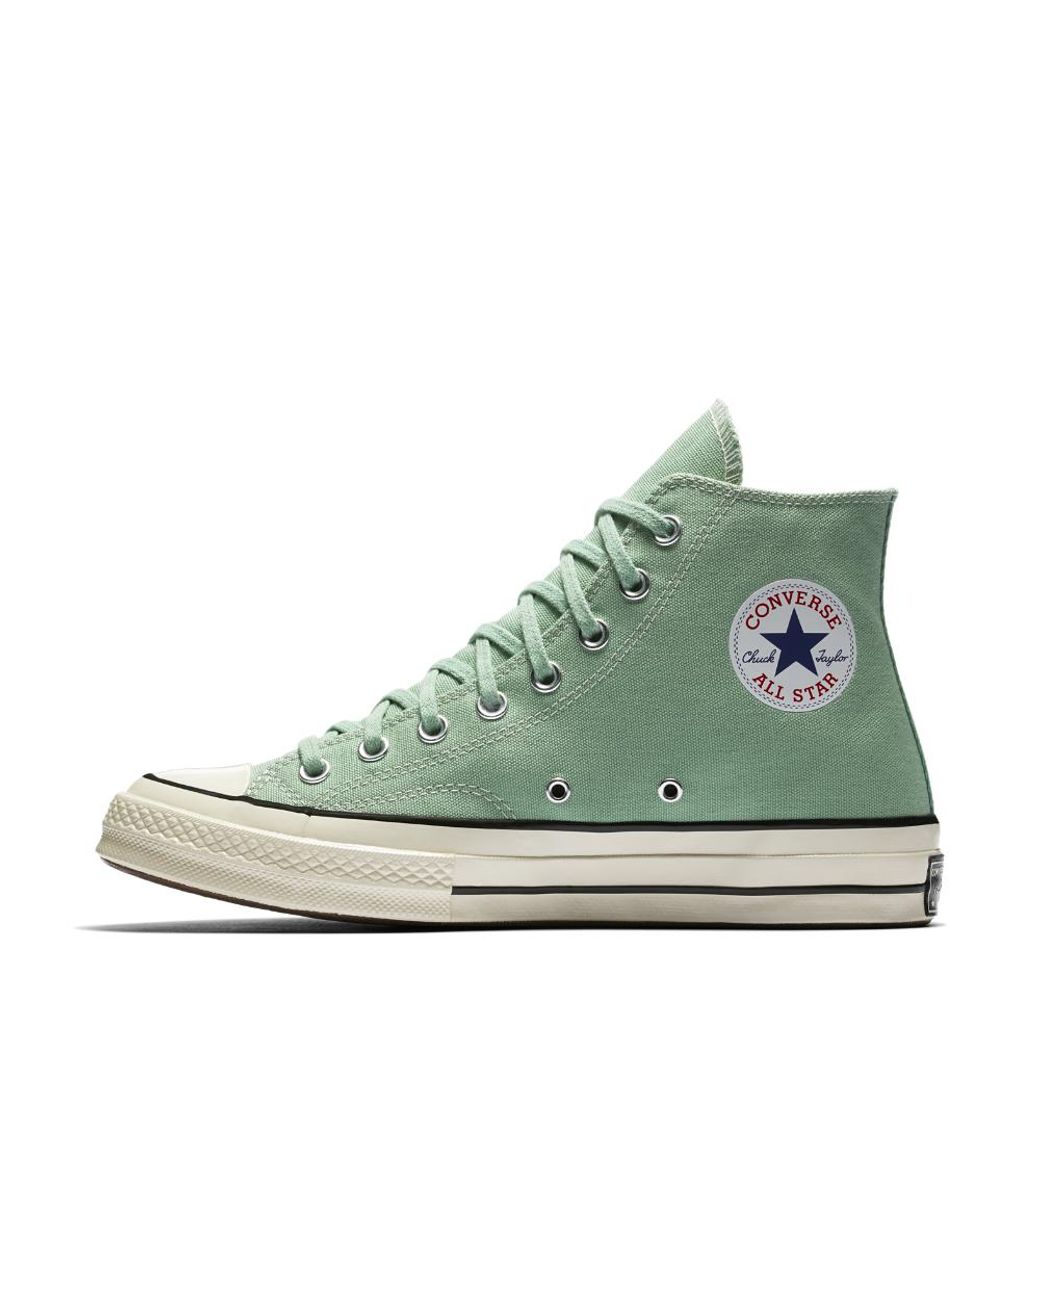 Converse Chuck 70 Vintage Canvas High Top Shoe in Green | Lyst